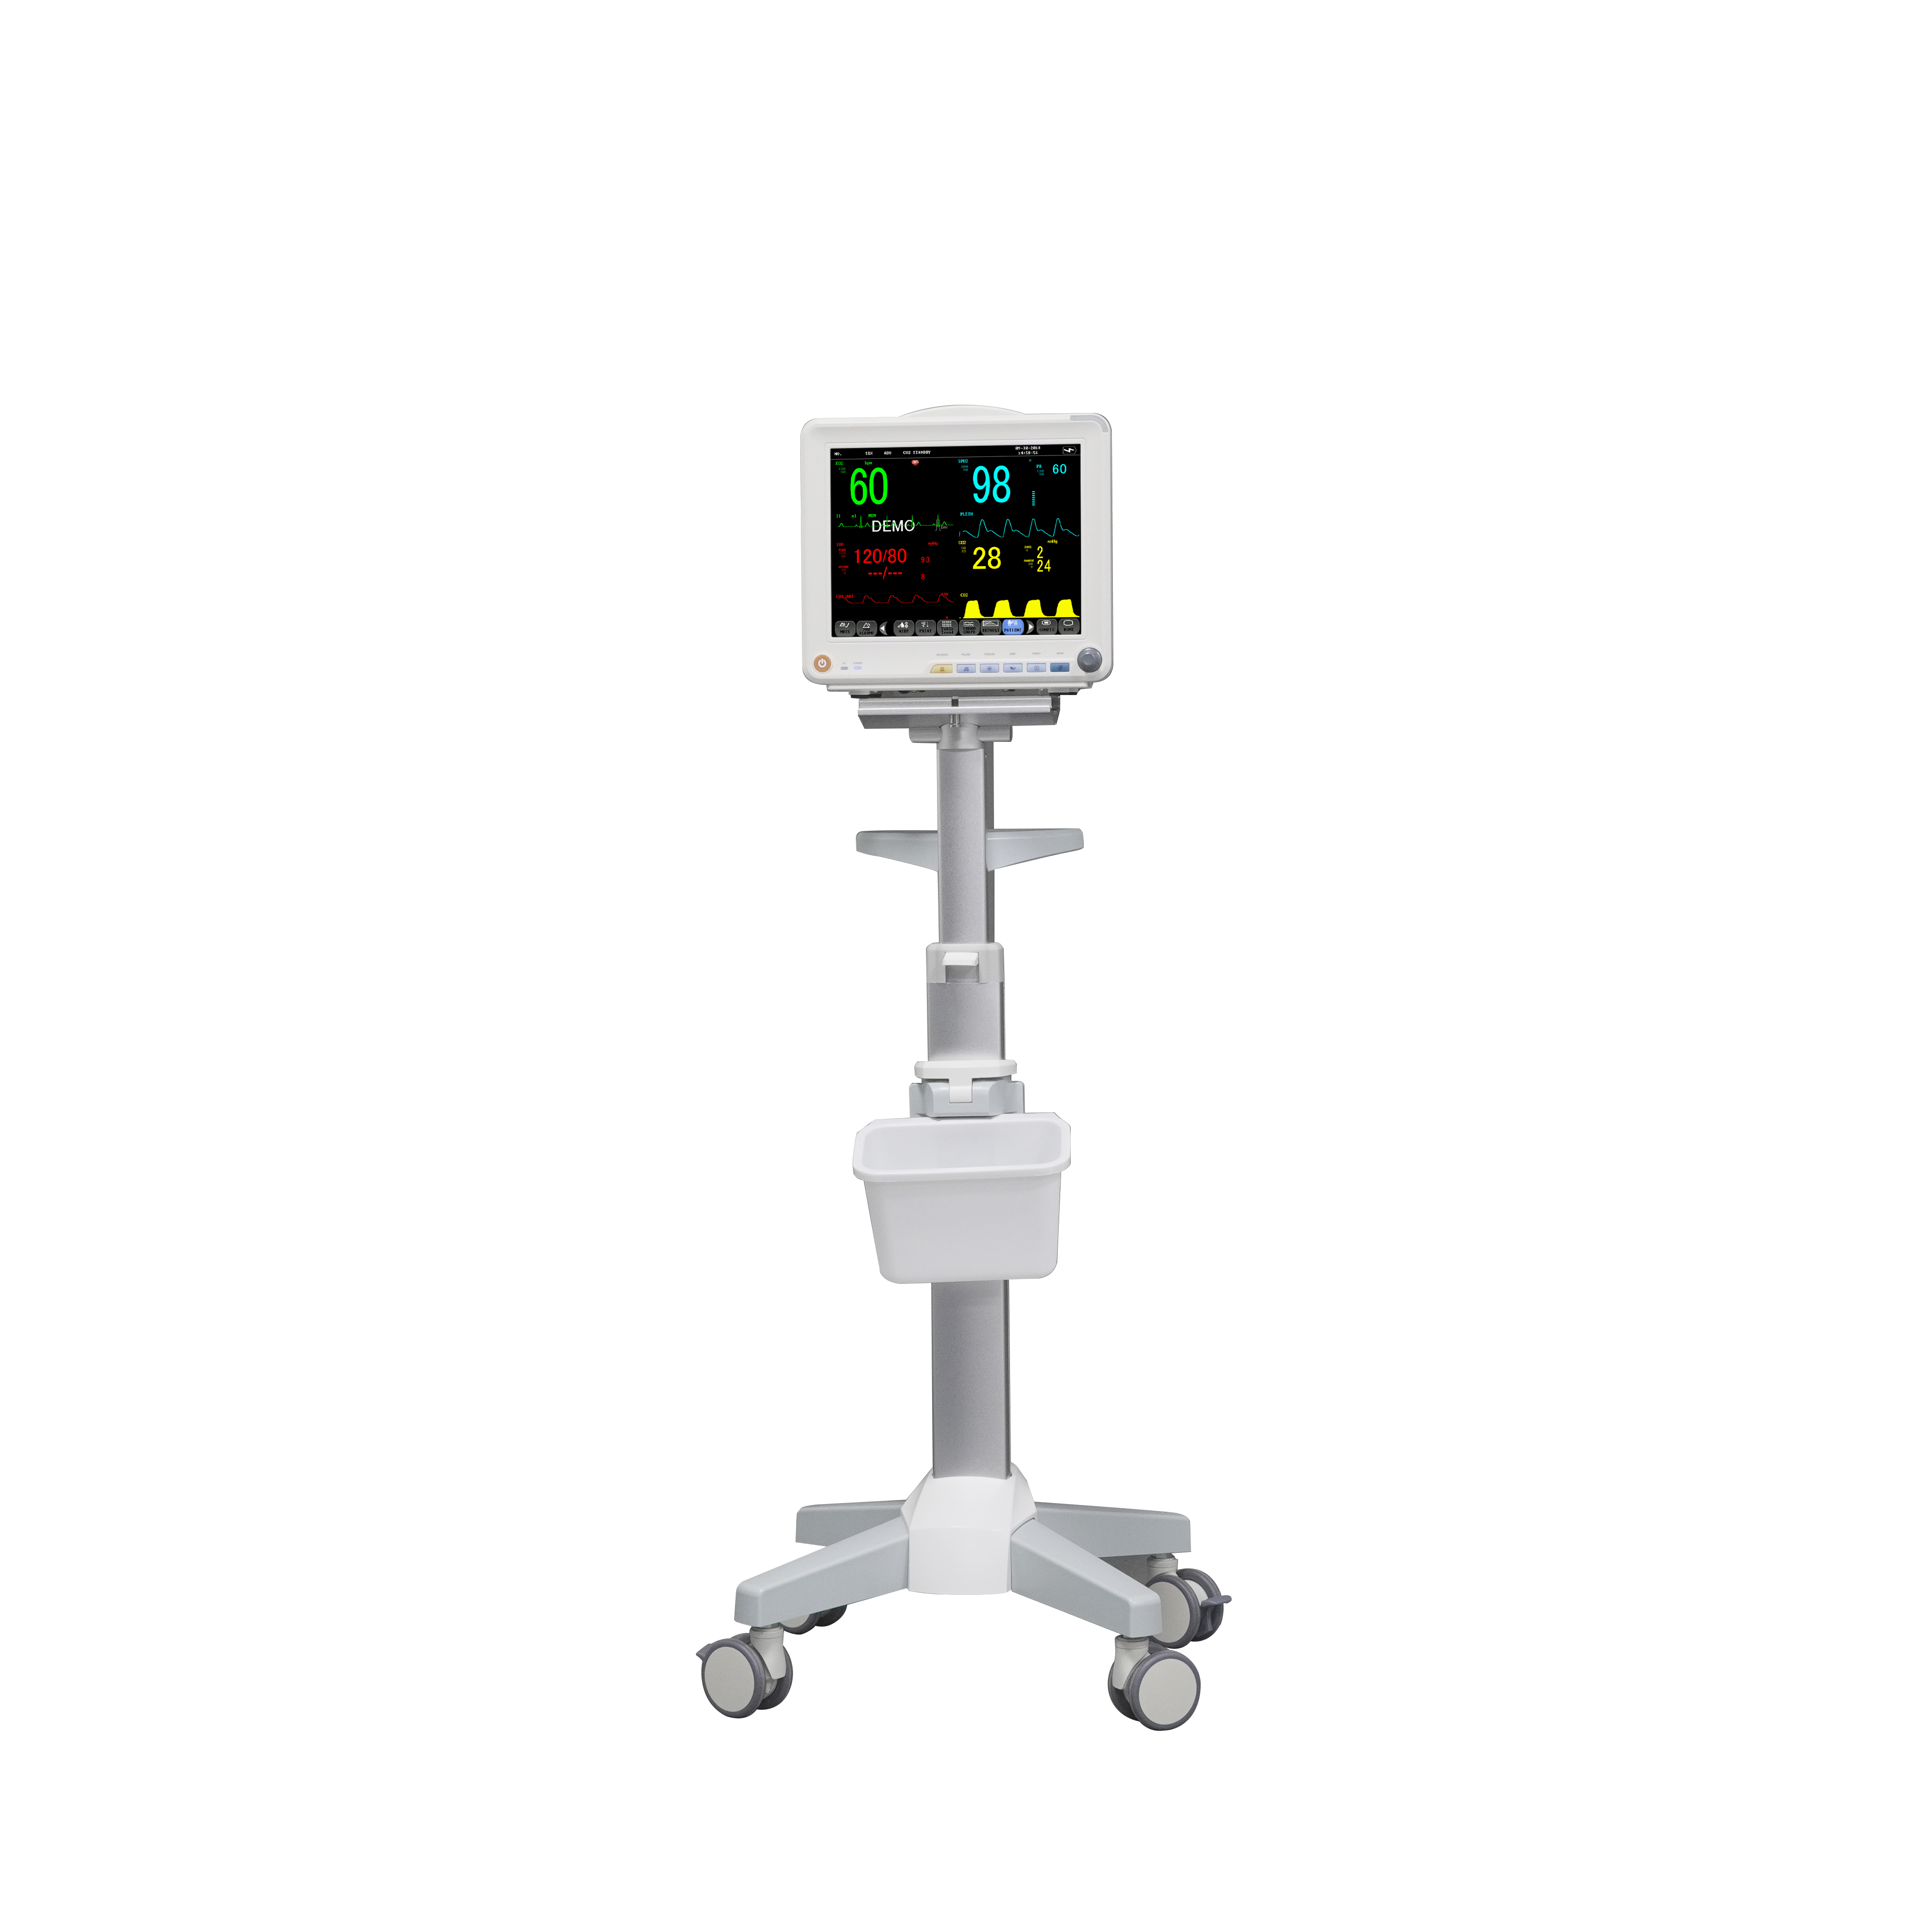 MS-8000 Multi-parameter Patient Monitor with Touch Screen